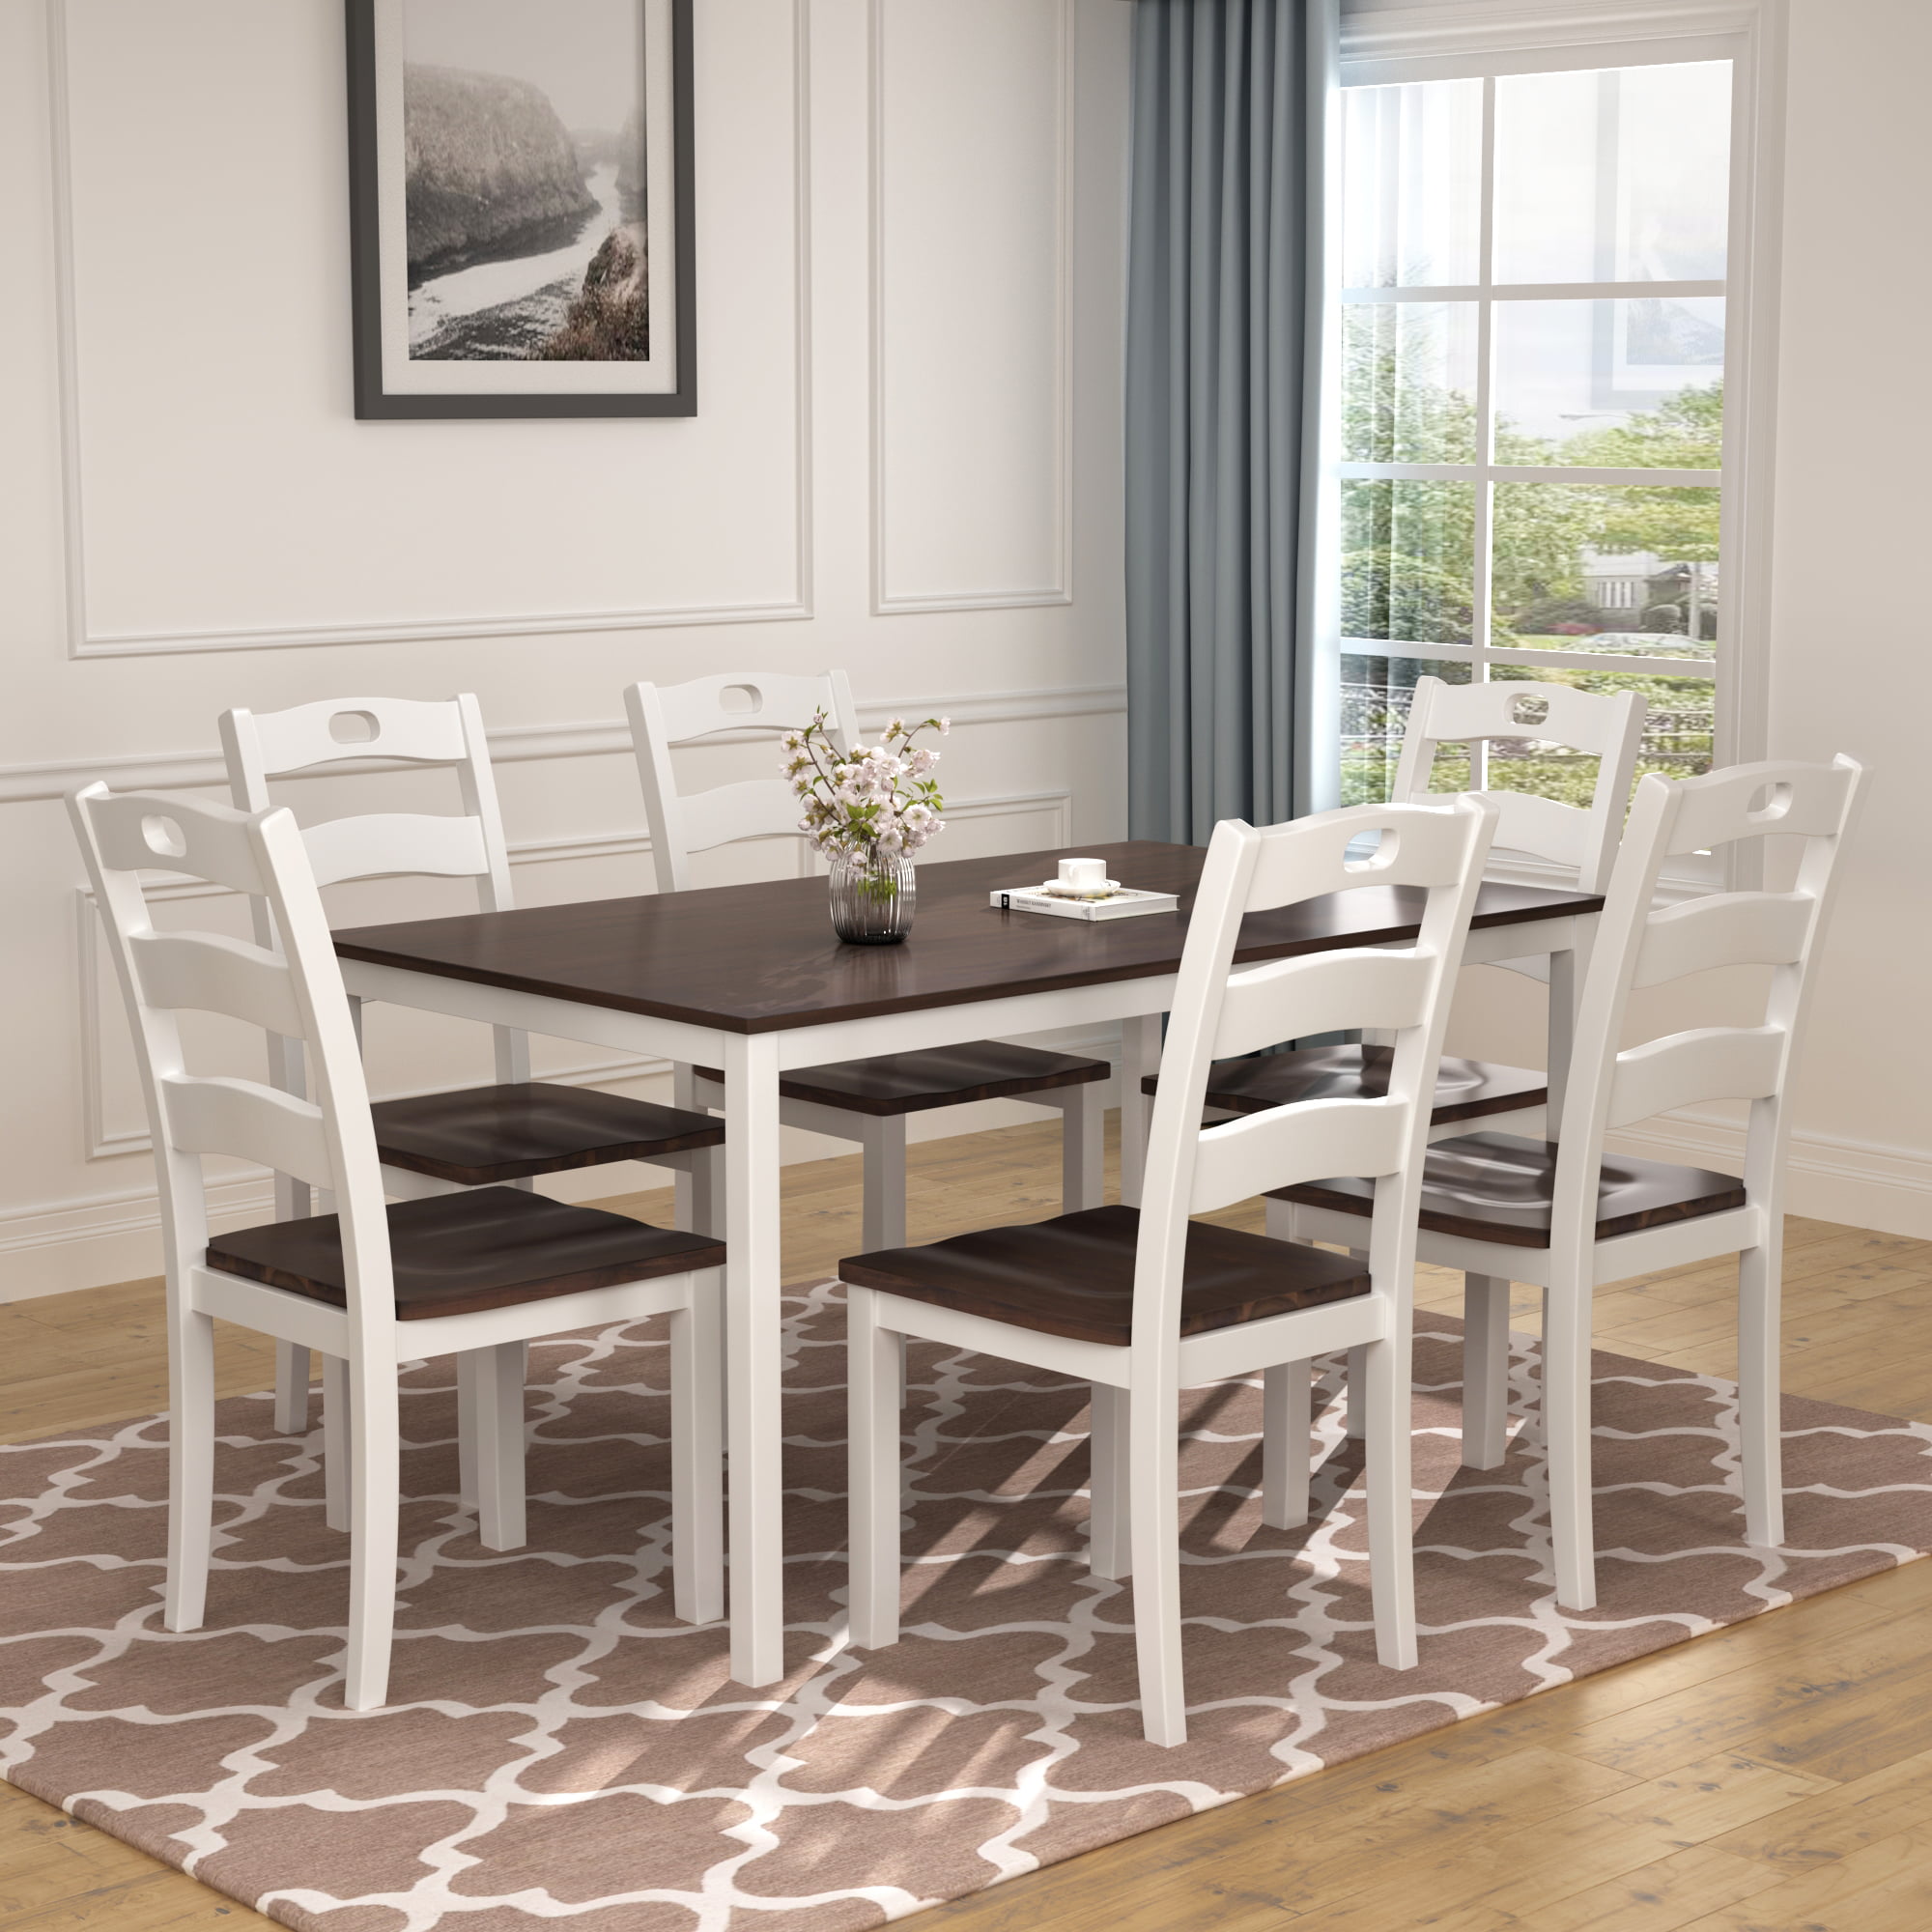 Clearance! Dining Table Set with 6 Chairs, 7 Piece Wooden Kitchen Table ...